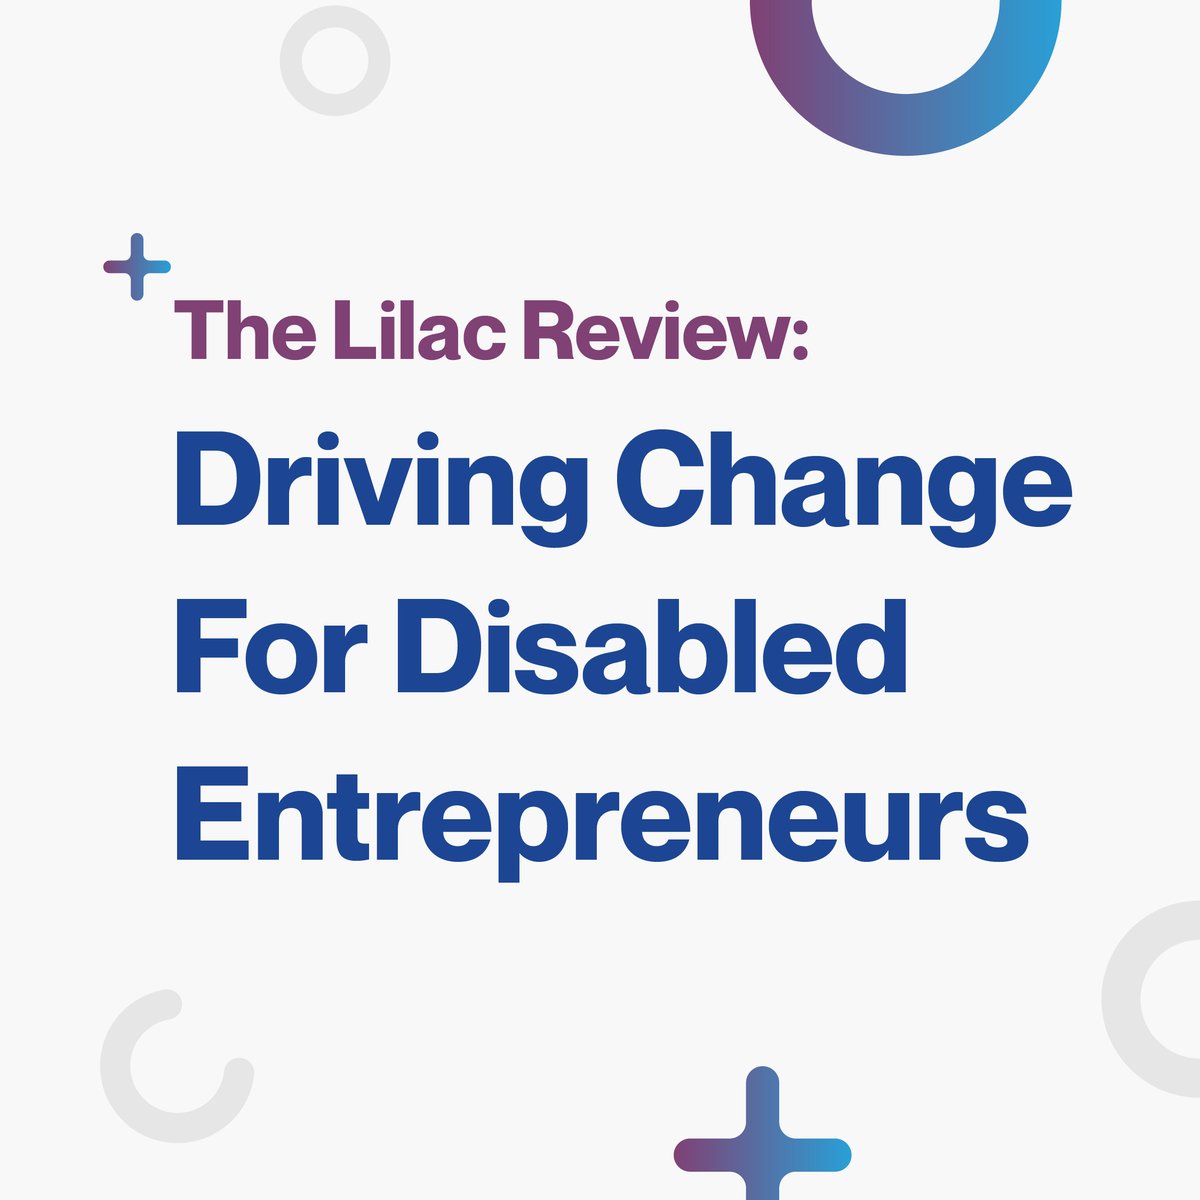 Entrepreneurship should be accessible to all. Our chair Sarah Howard MBE is pleased to be part of the The Lilac Review UK. Today's Interim Report highlights the challenges faced by disabled entrepreneurs and suggests actionable ways to overcome them. 👇 lilacreview.com/interim-report